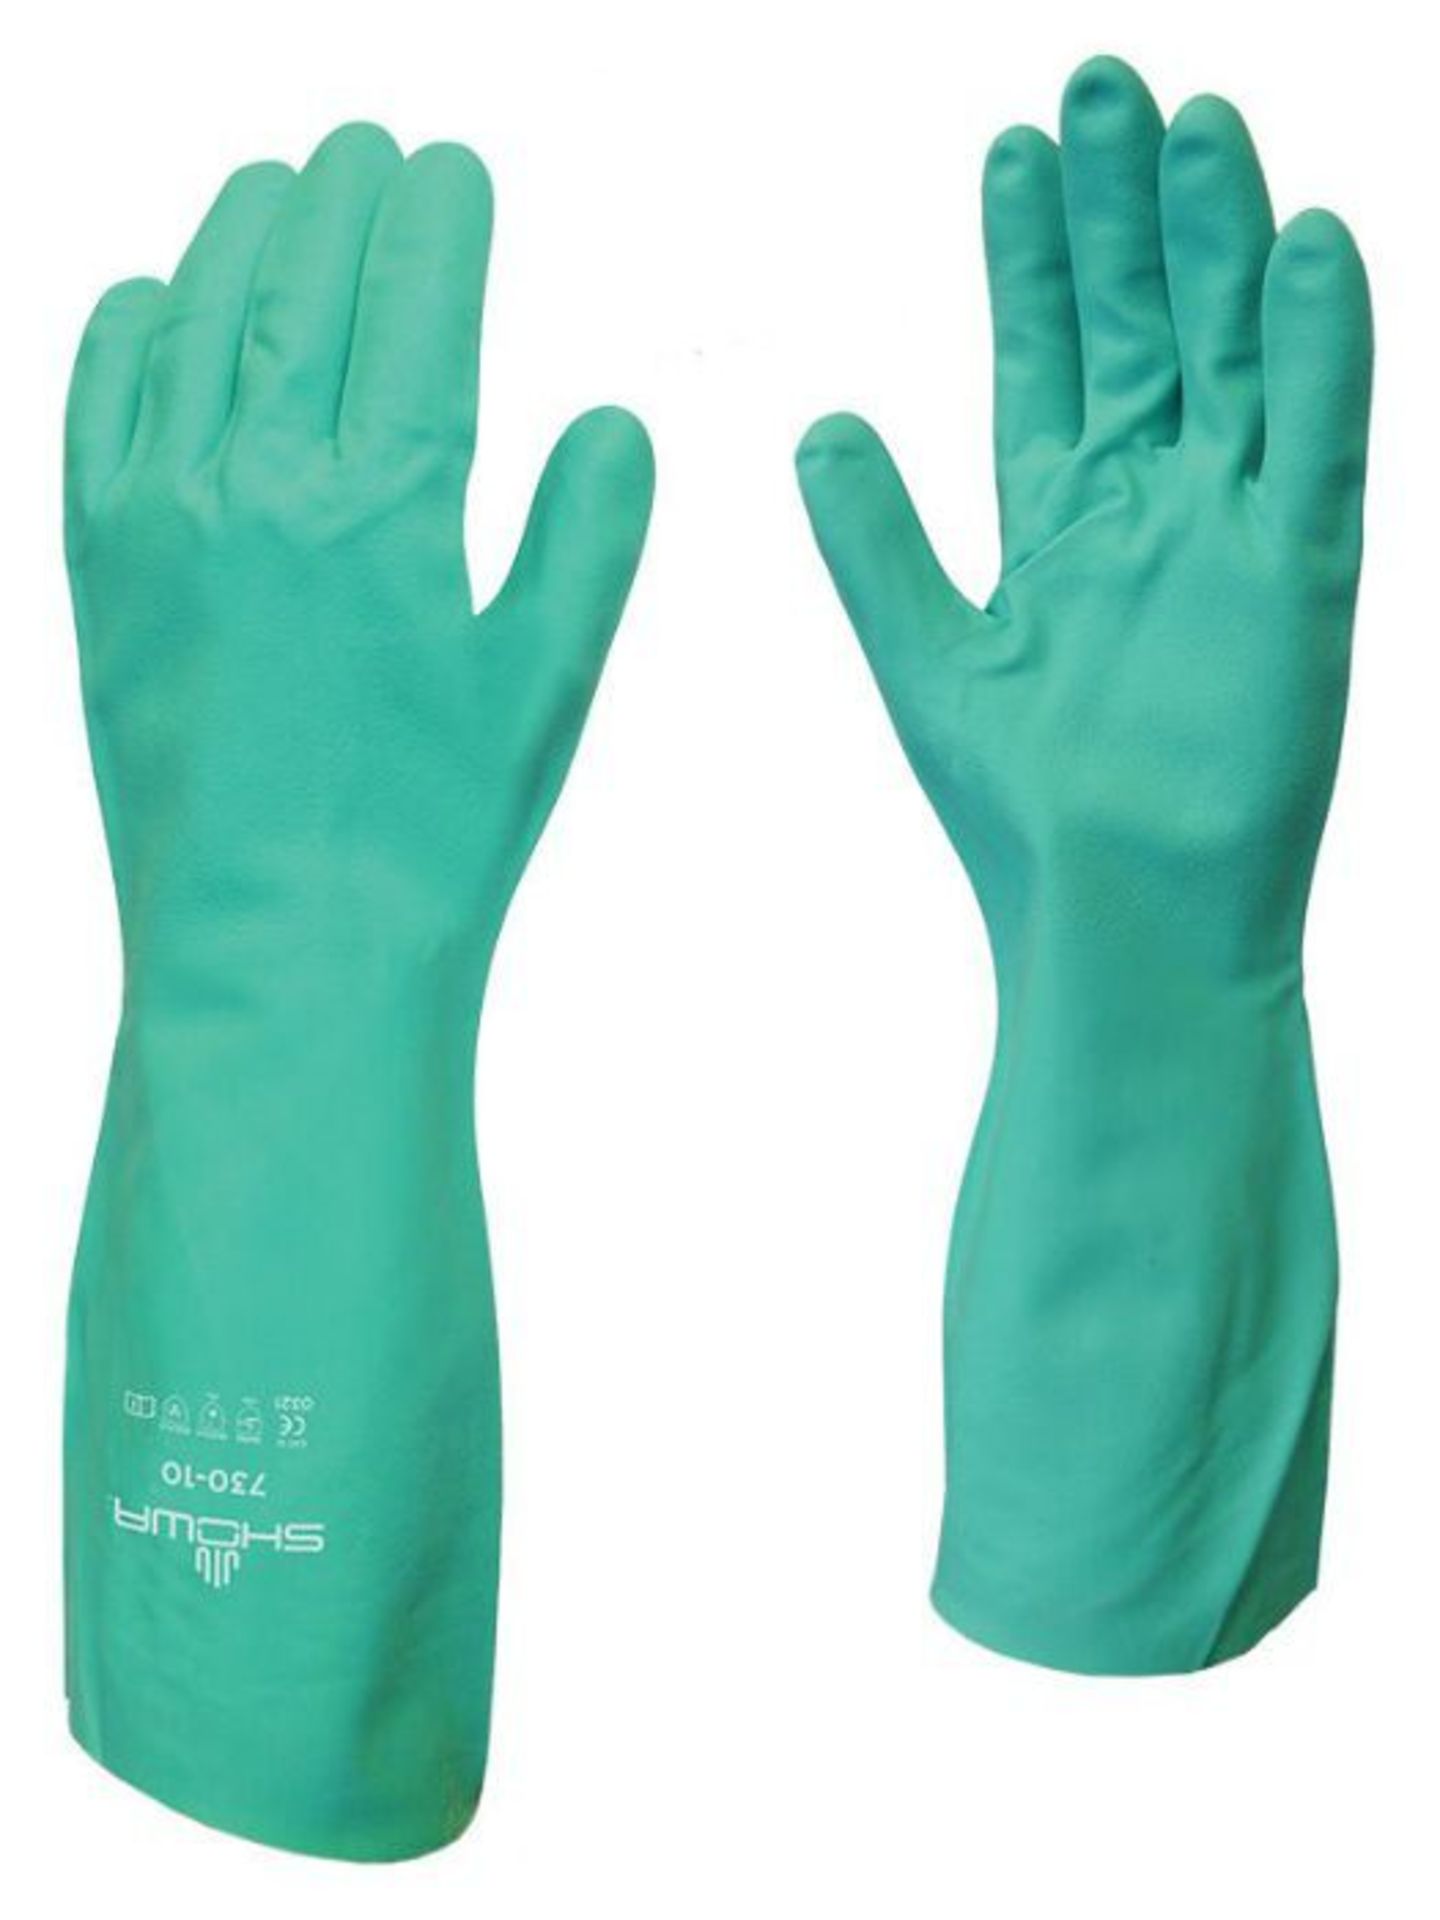 Box 144 Pairs of Showa 730-10 Chemical Resistant Gloves / Gauntlet Size 10 H9 2000139630 - Image 4 of 6